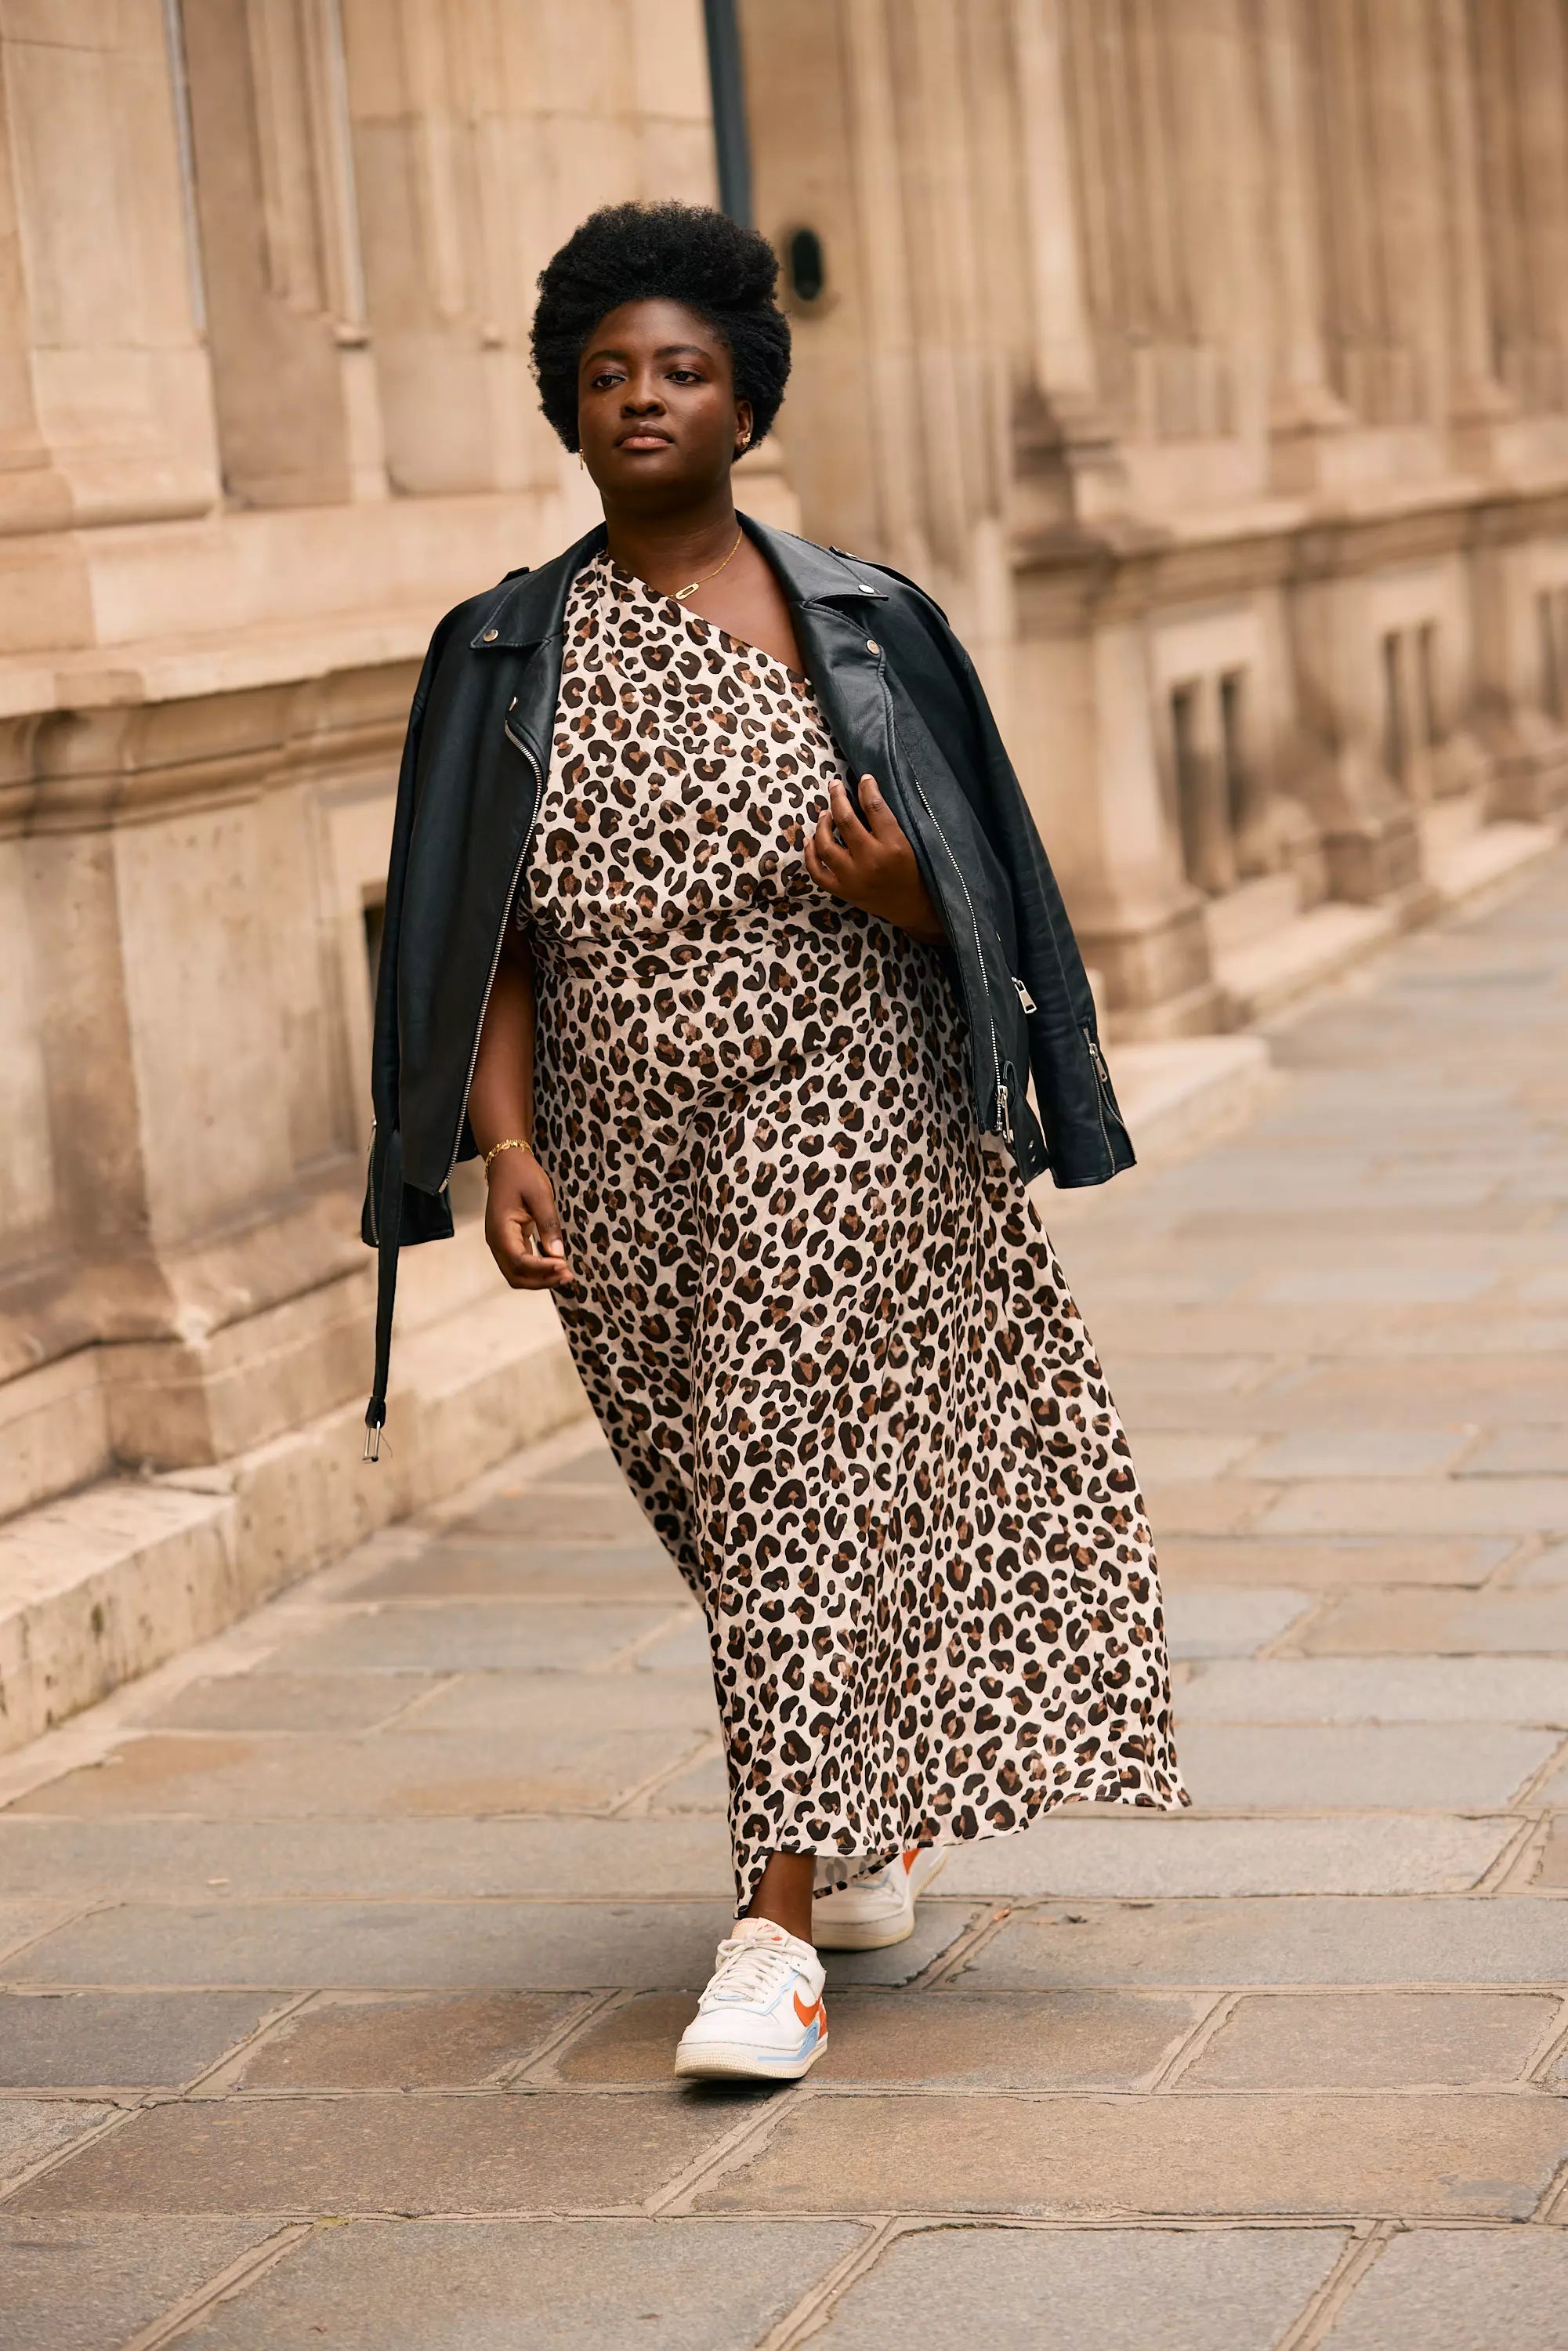 Chic and edgy outfit - Leopard skirt paired with SOPHIE one-shoulder top and black leather jacket